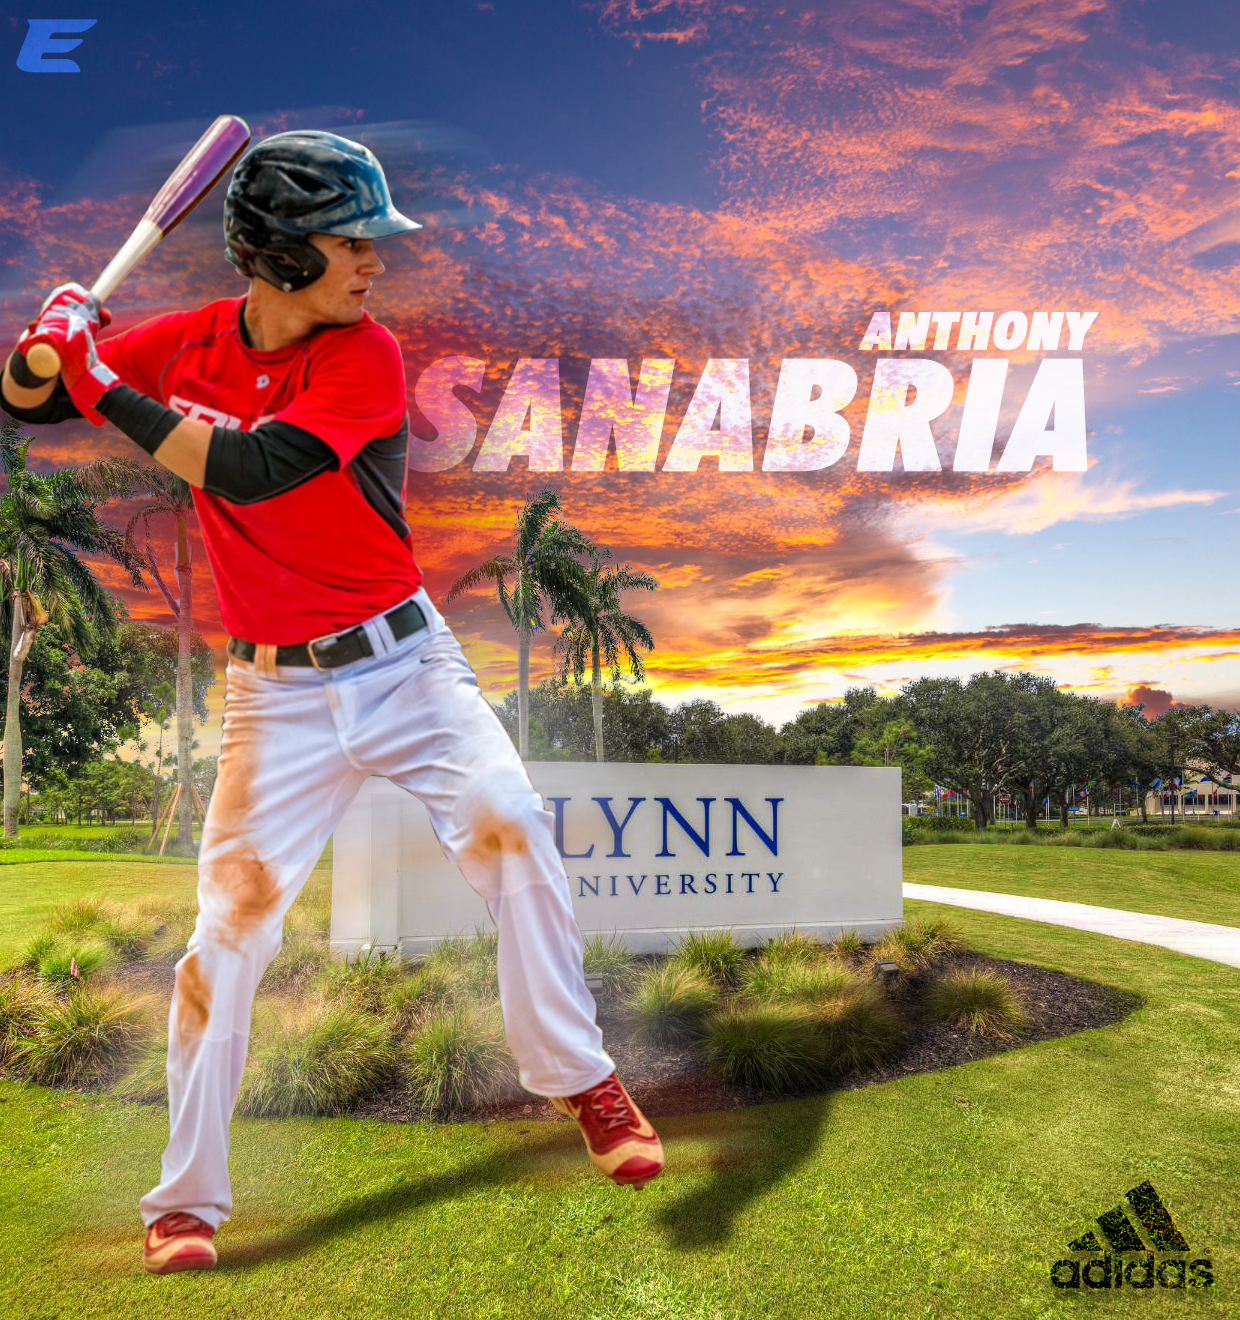 You are currently viewing Sanabria to Lynn University!